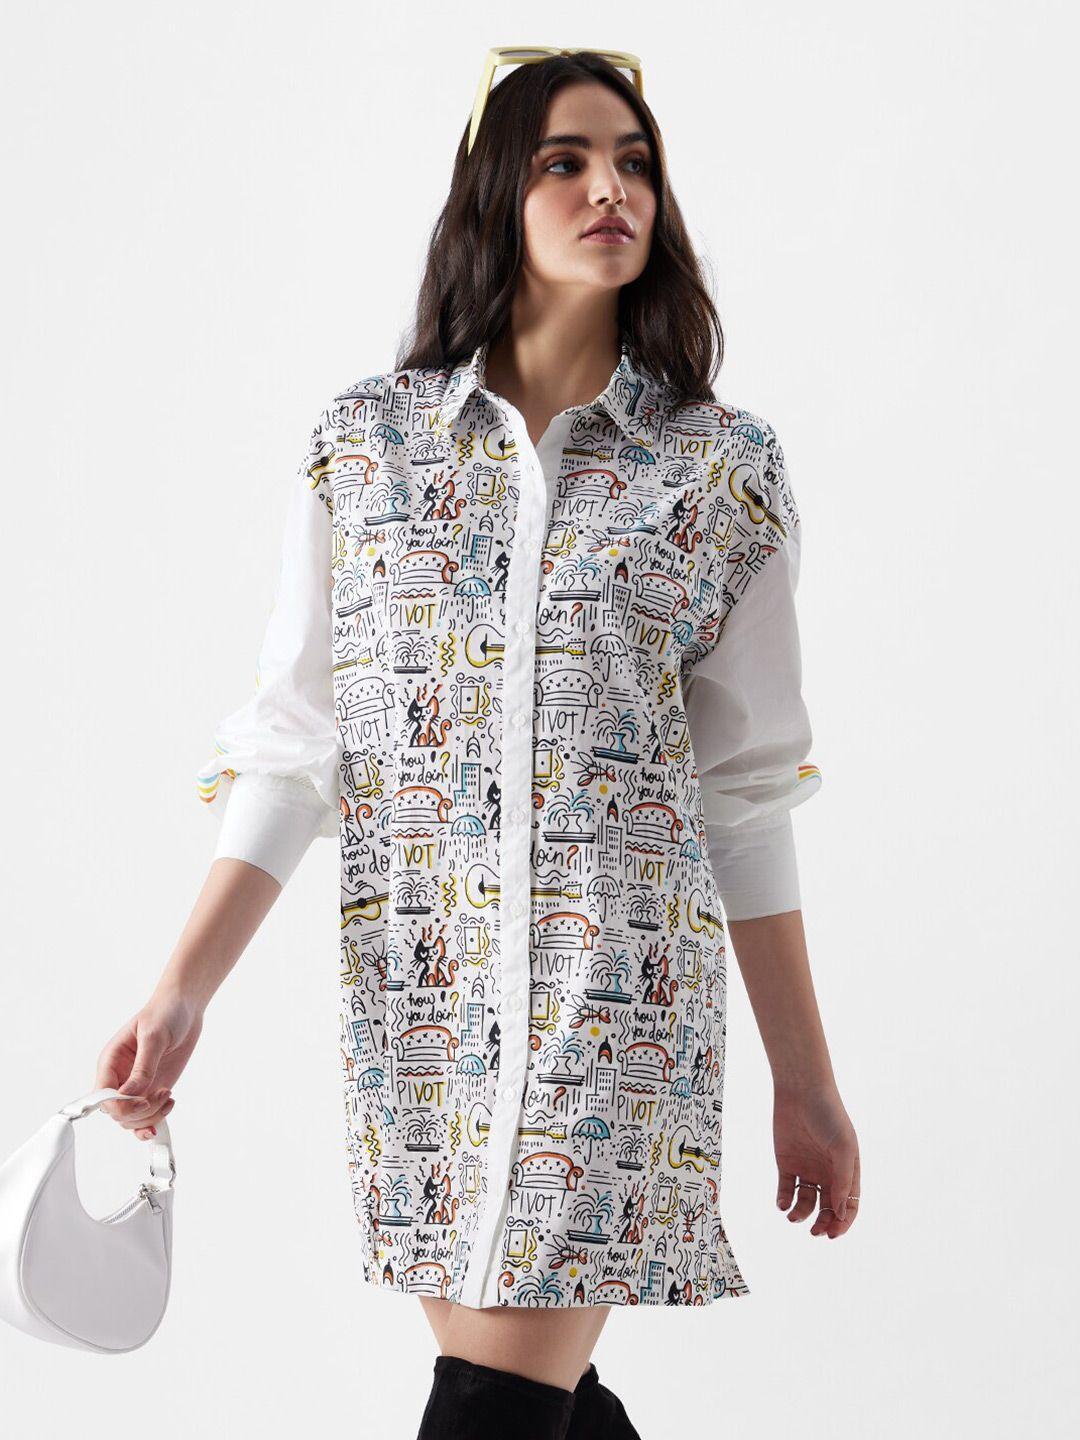 the-souled-store-friends-printed-pure-cotton-shirt-mini-dress